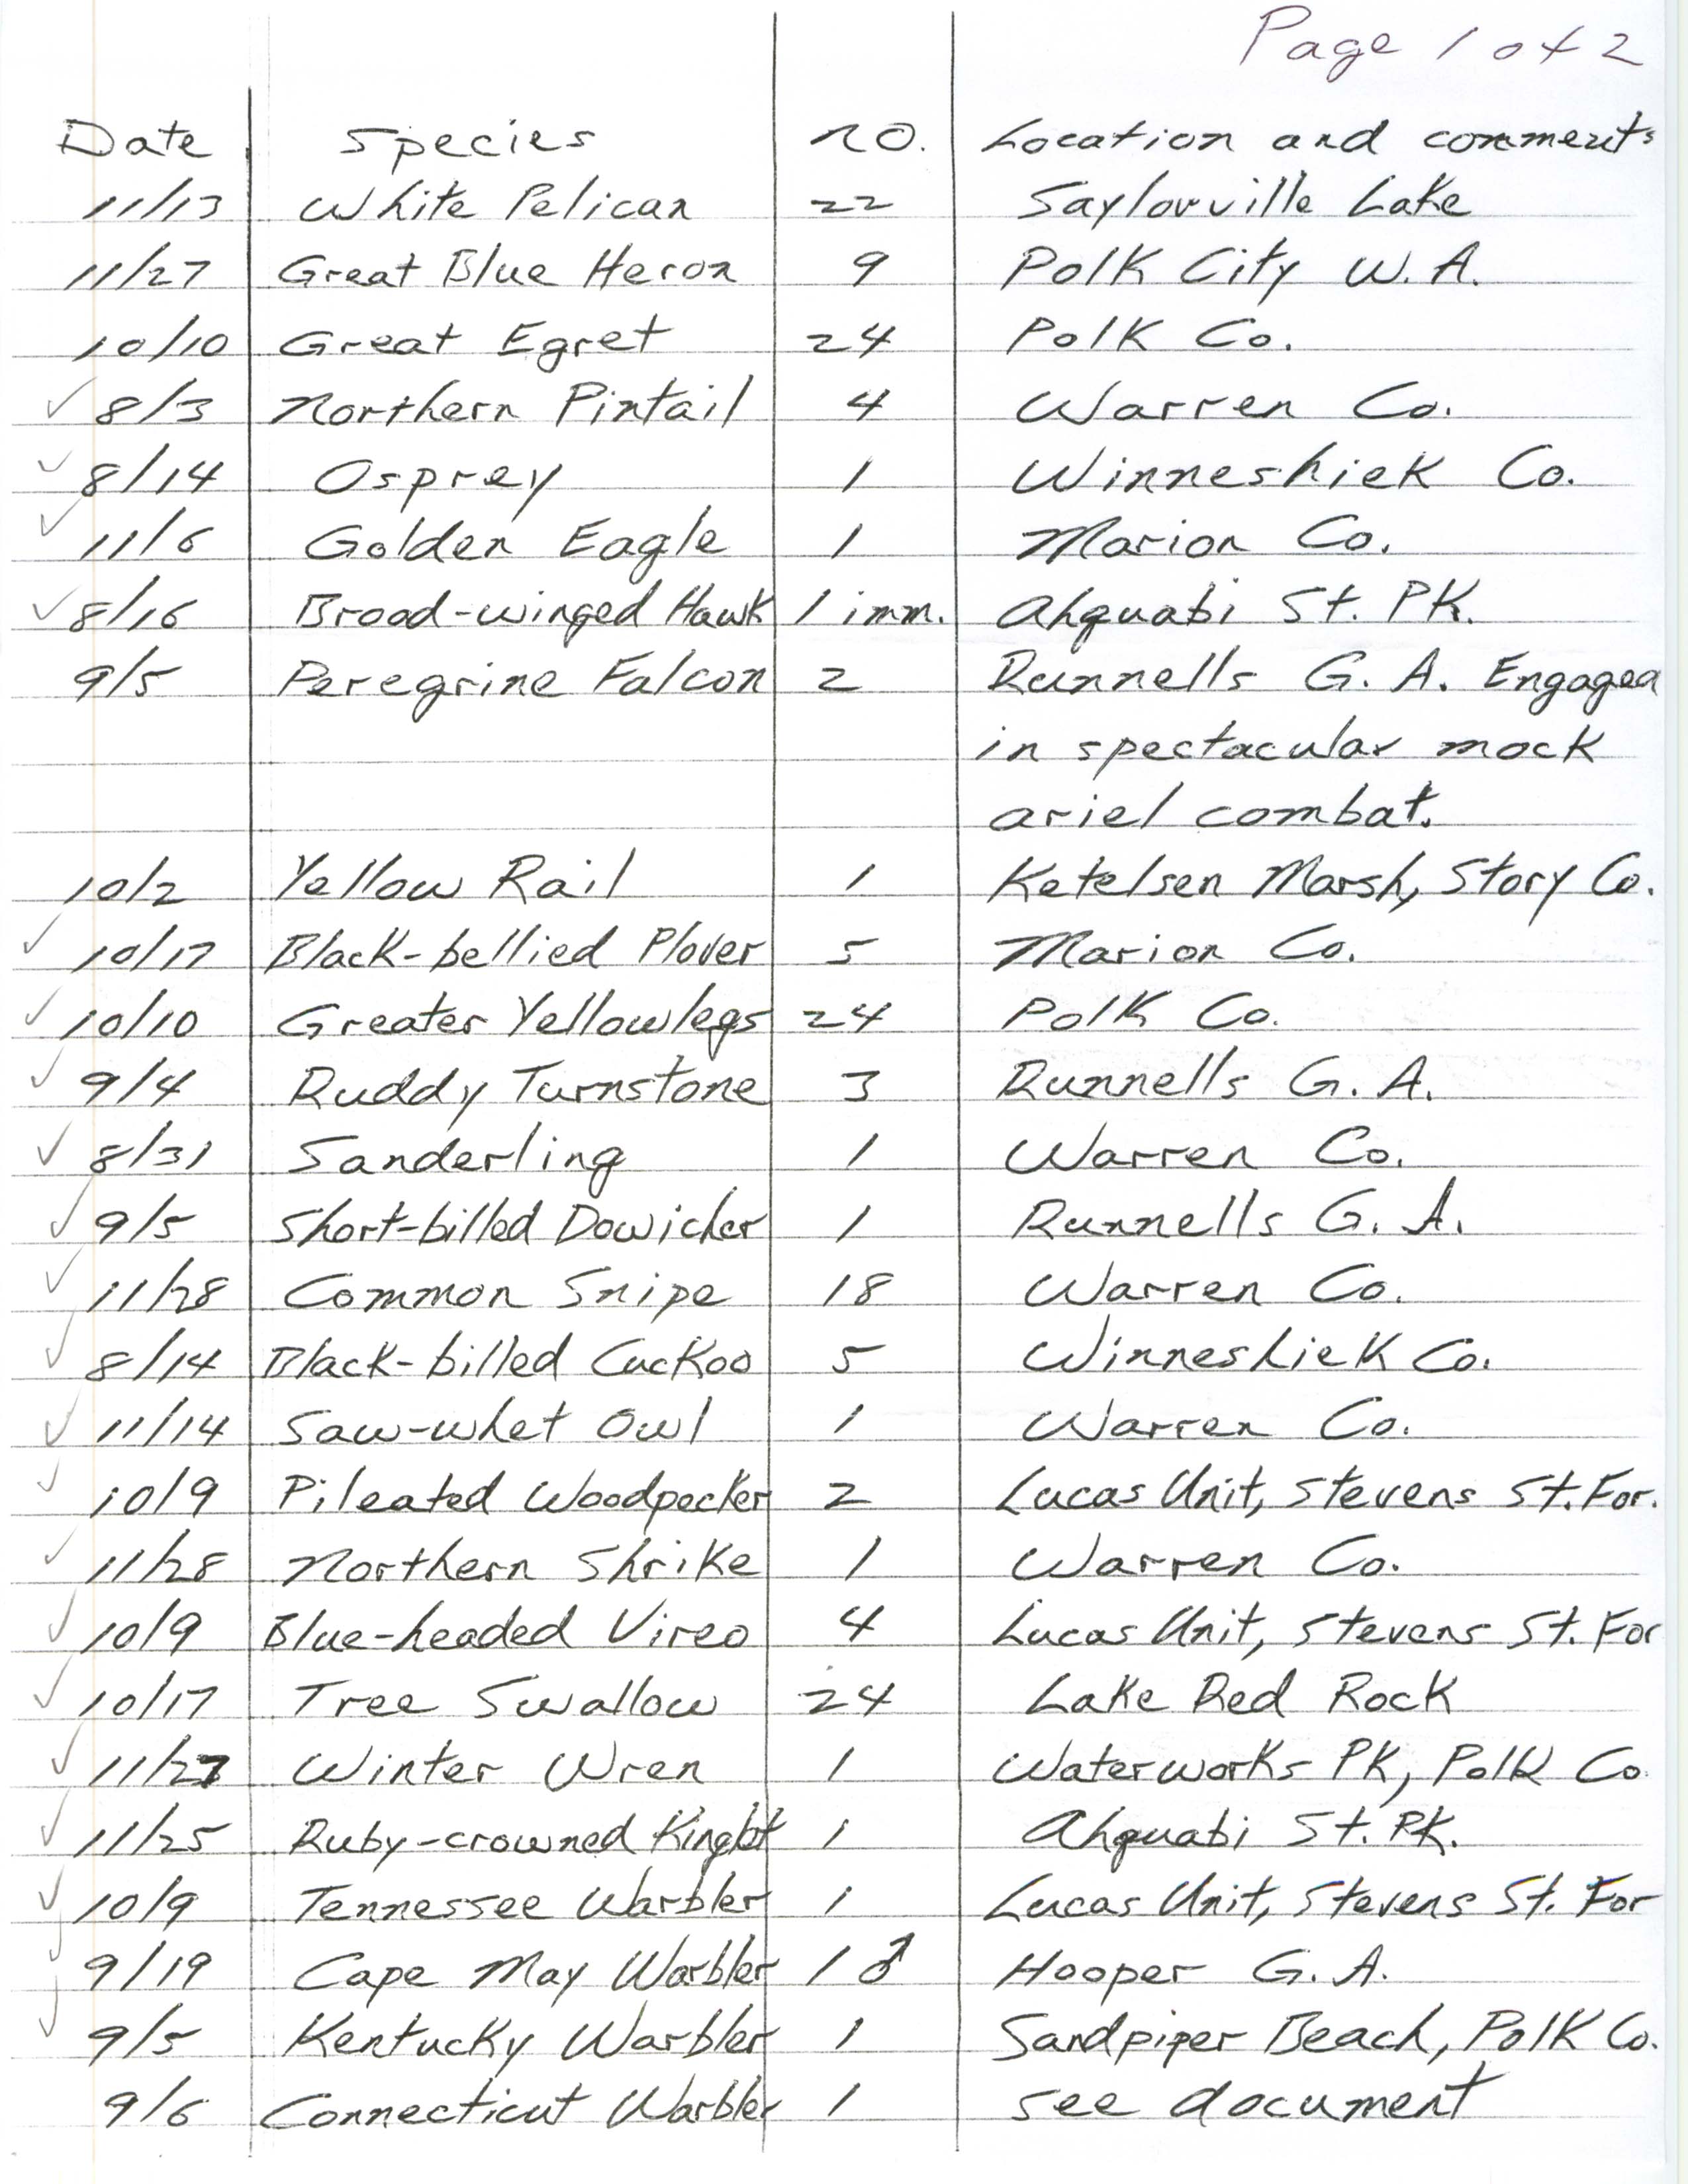 Annotated bird sighting list for fall 1999 compiled by Jim Sinclair